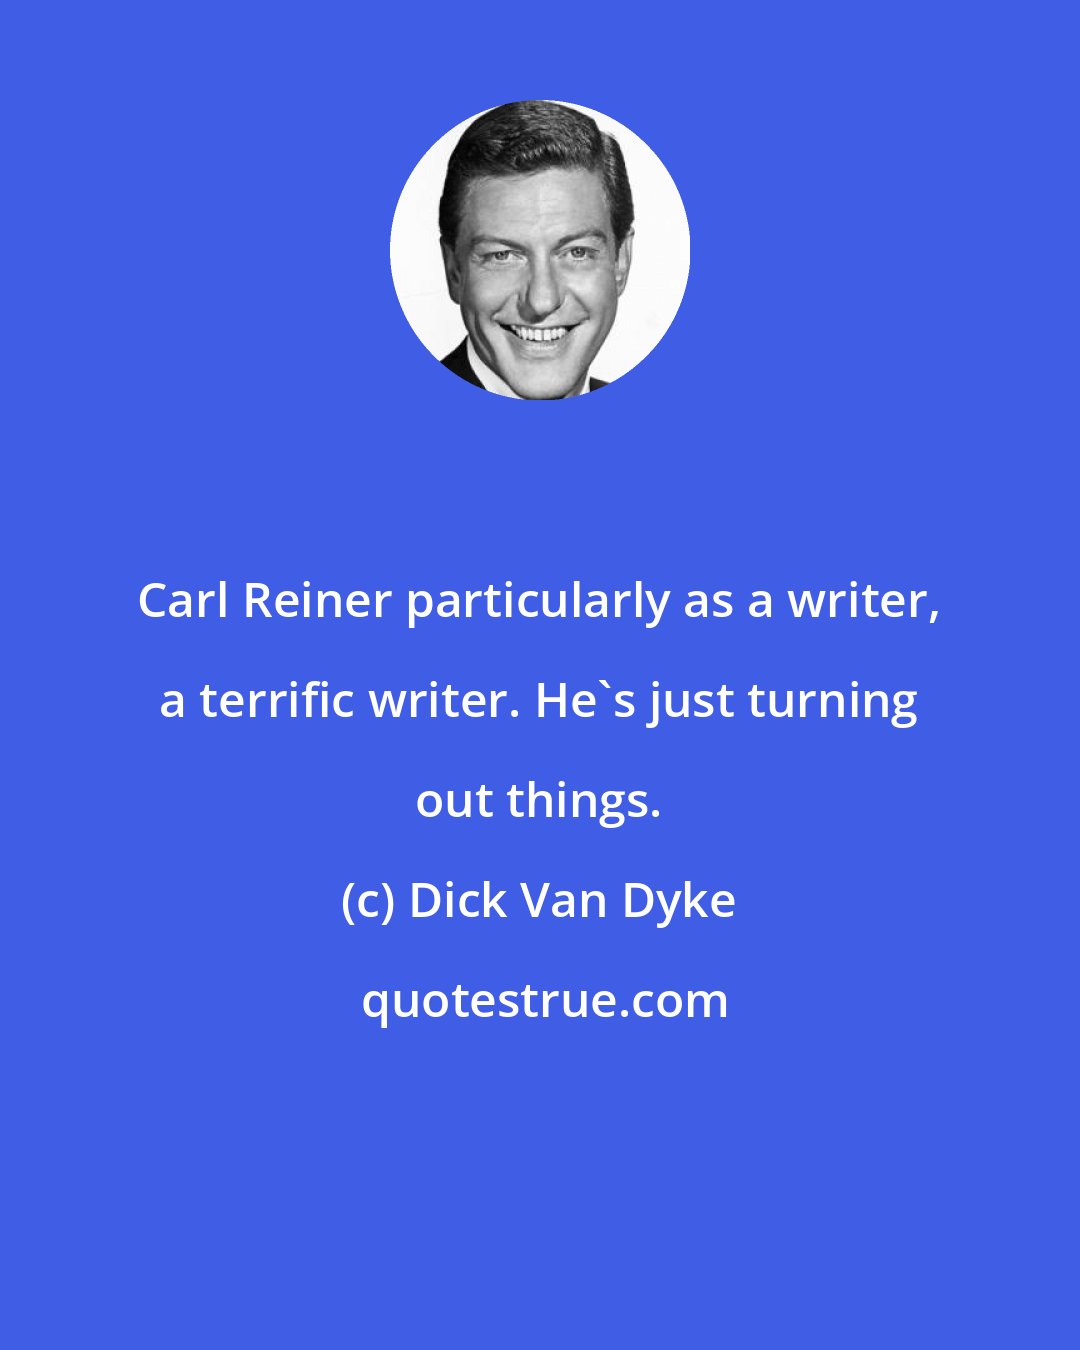 Dick Van Dyke: Carl Reiner particularly as a writer, a terrific writer. He's just turning out things.